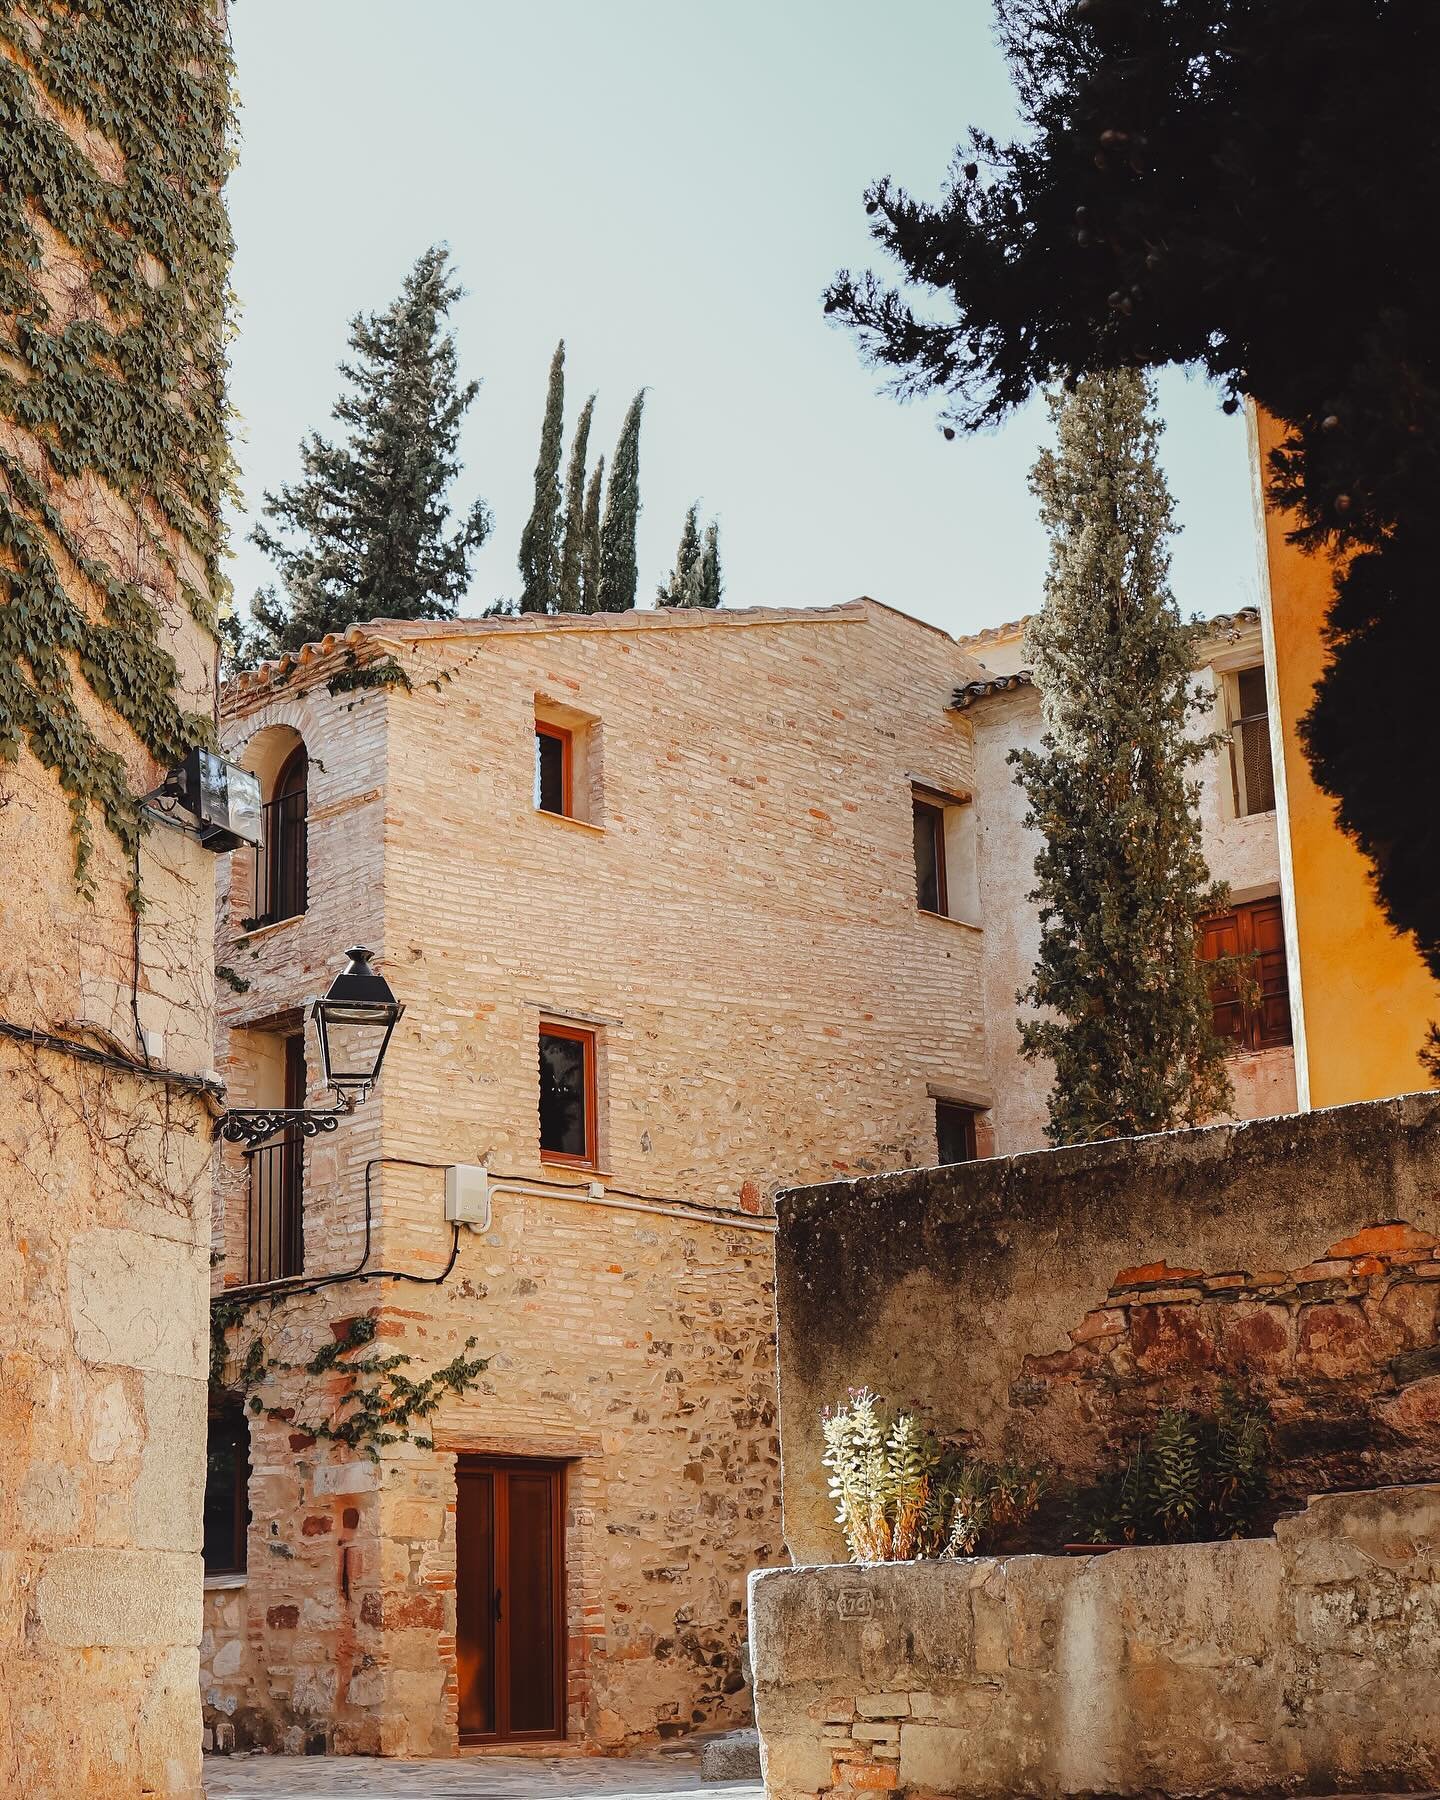 POV: you spend sunset in the mountains 🇪🇸⛰️

A beautiful day wandering around hidden hilltop villages, ended with vineyards &amp; wine tasting in the Montsant natural park.

Ad | Press trip #jet2costadorada #costadaurada #costadorada #costadauradat